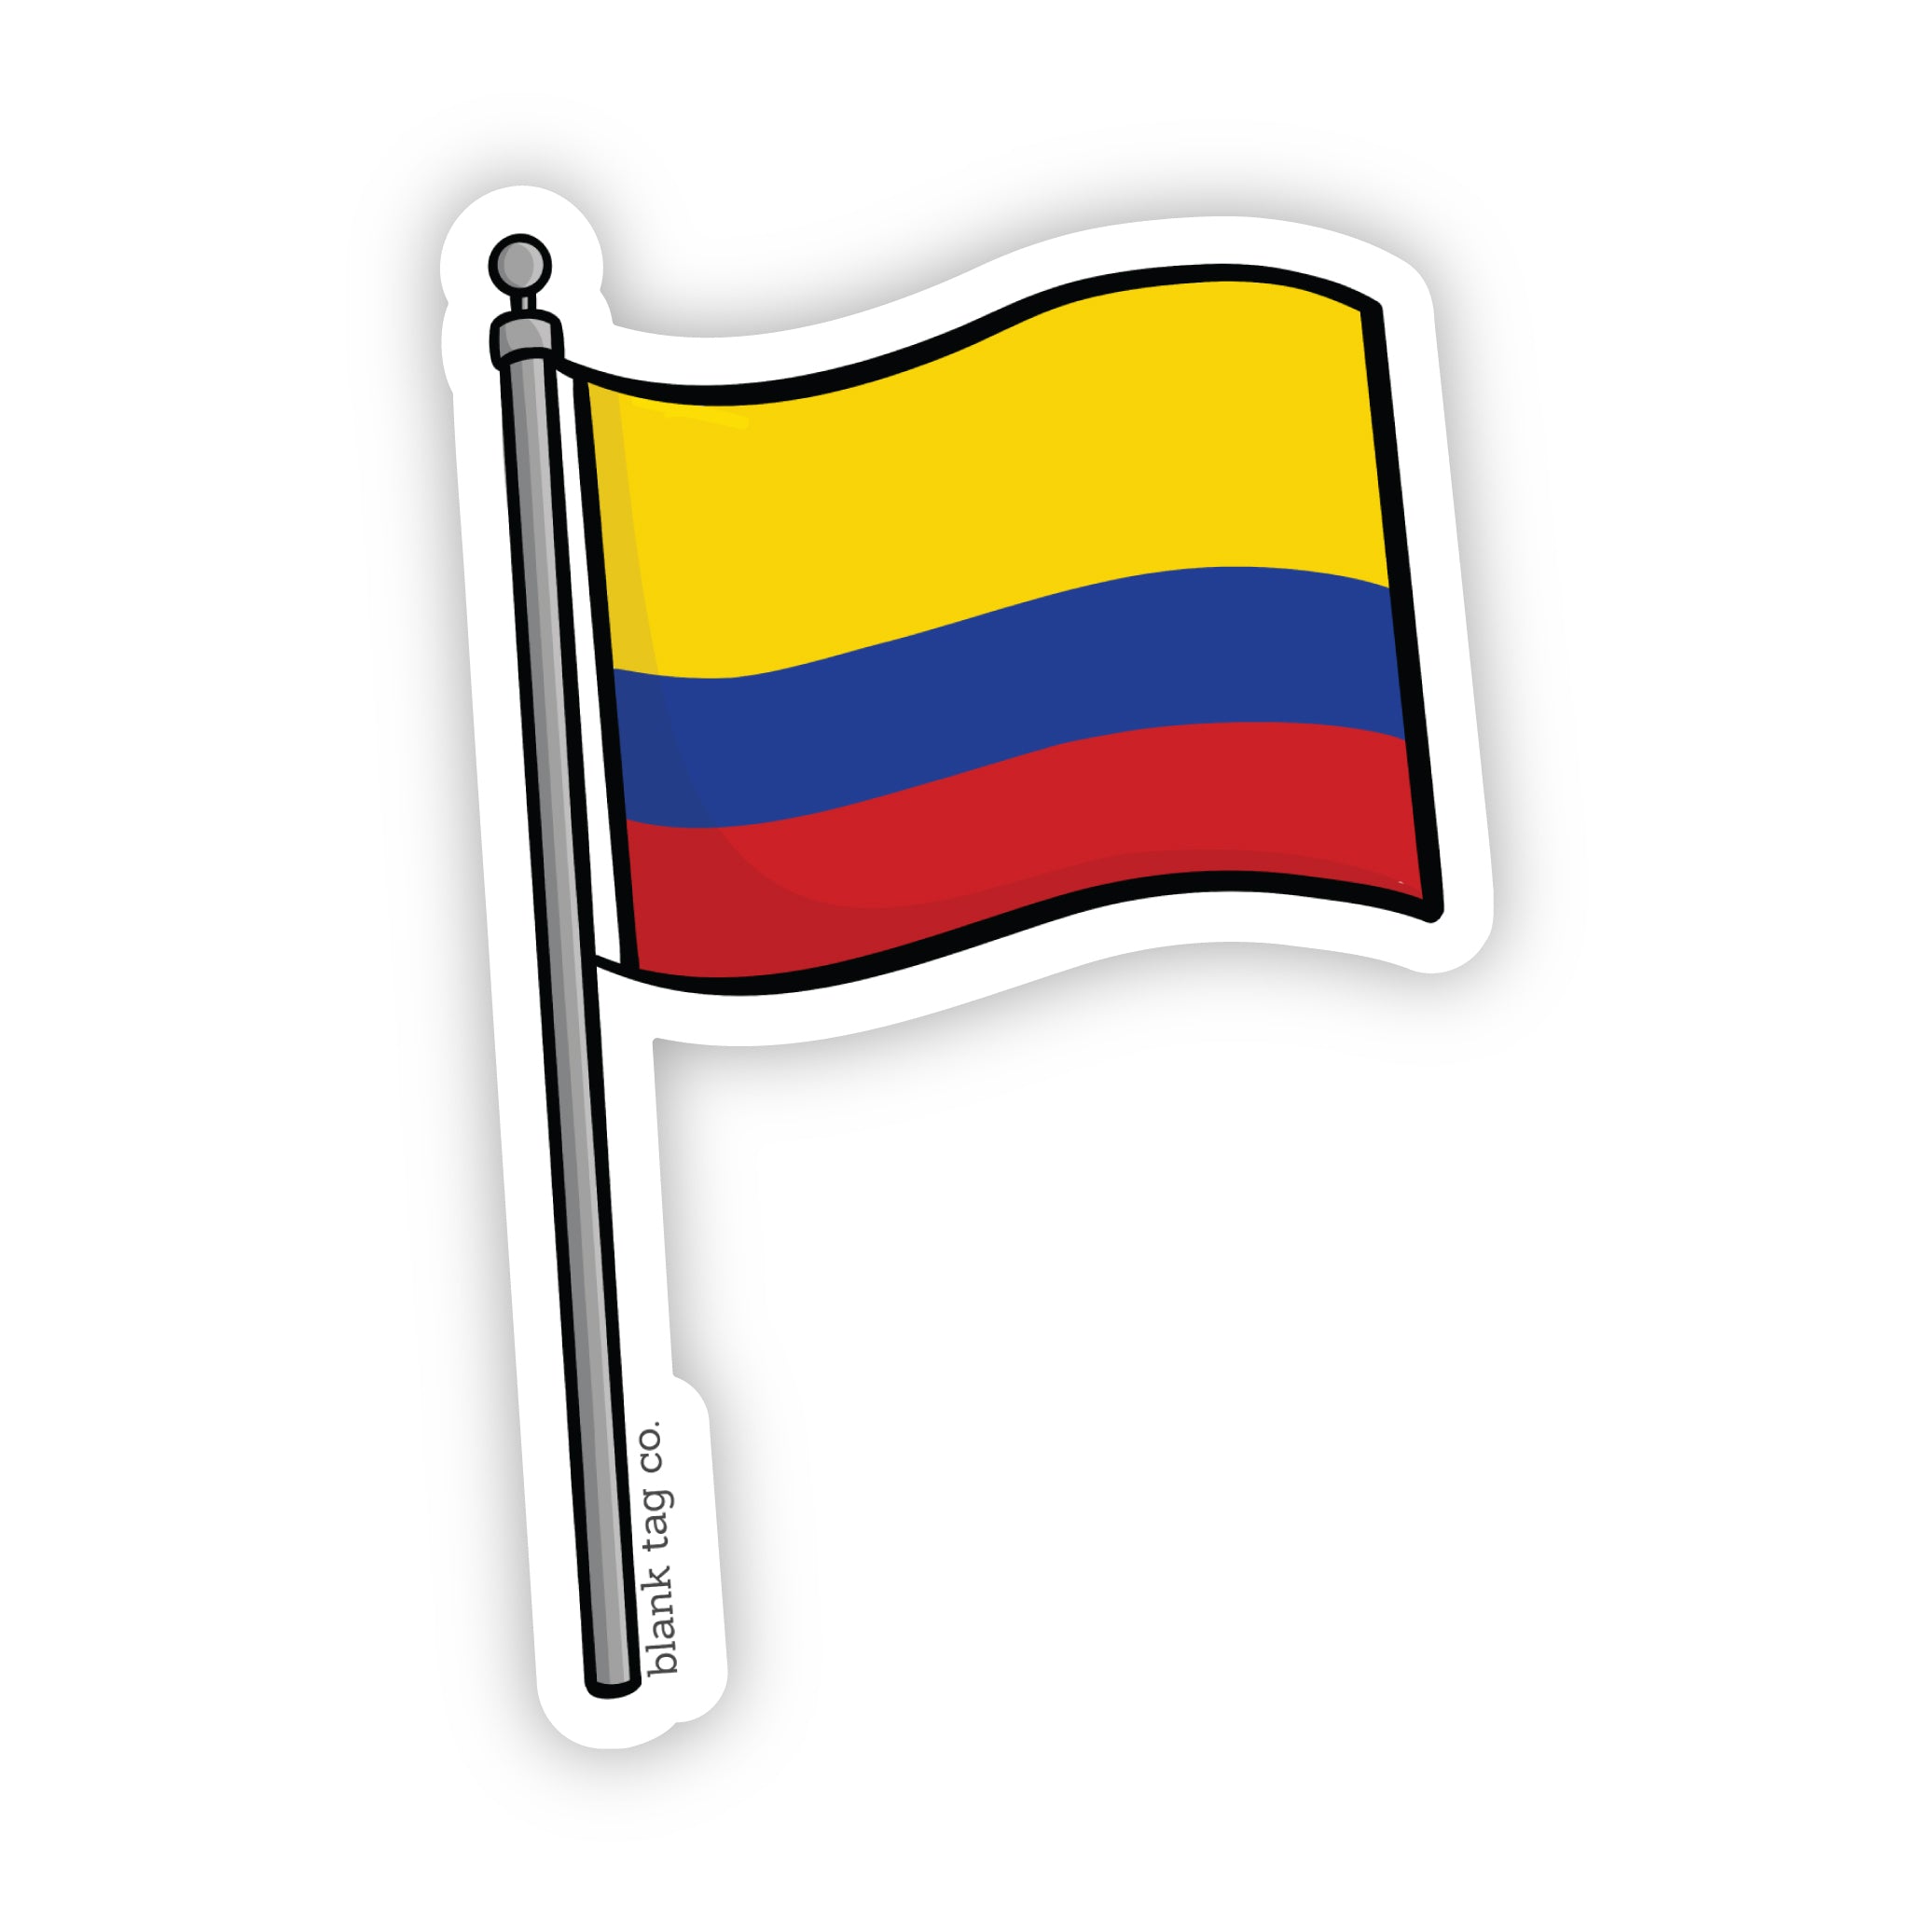 The Colombia Flag Sticker